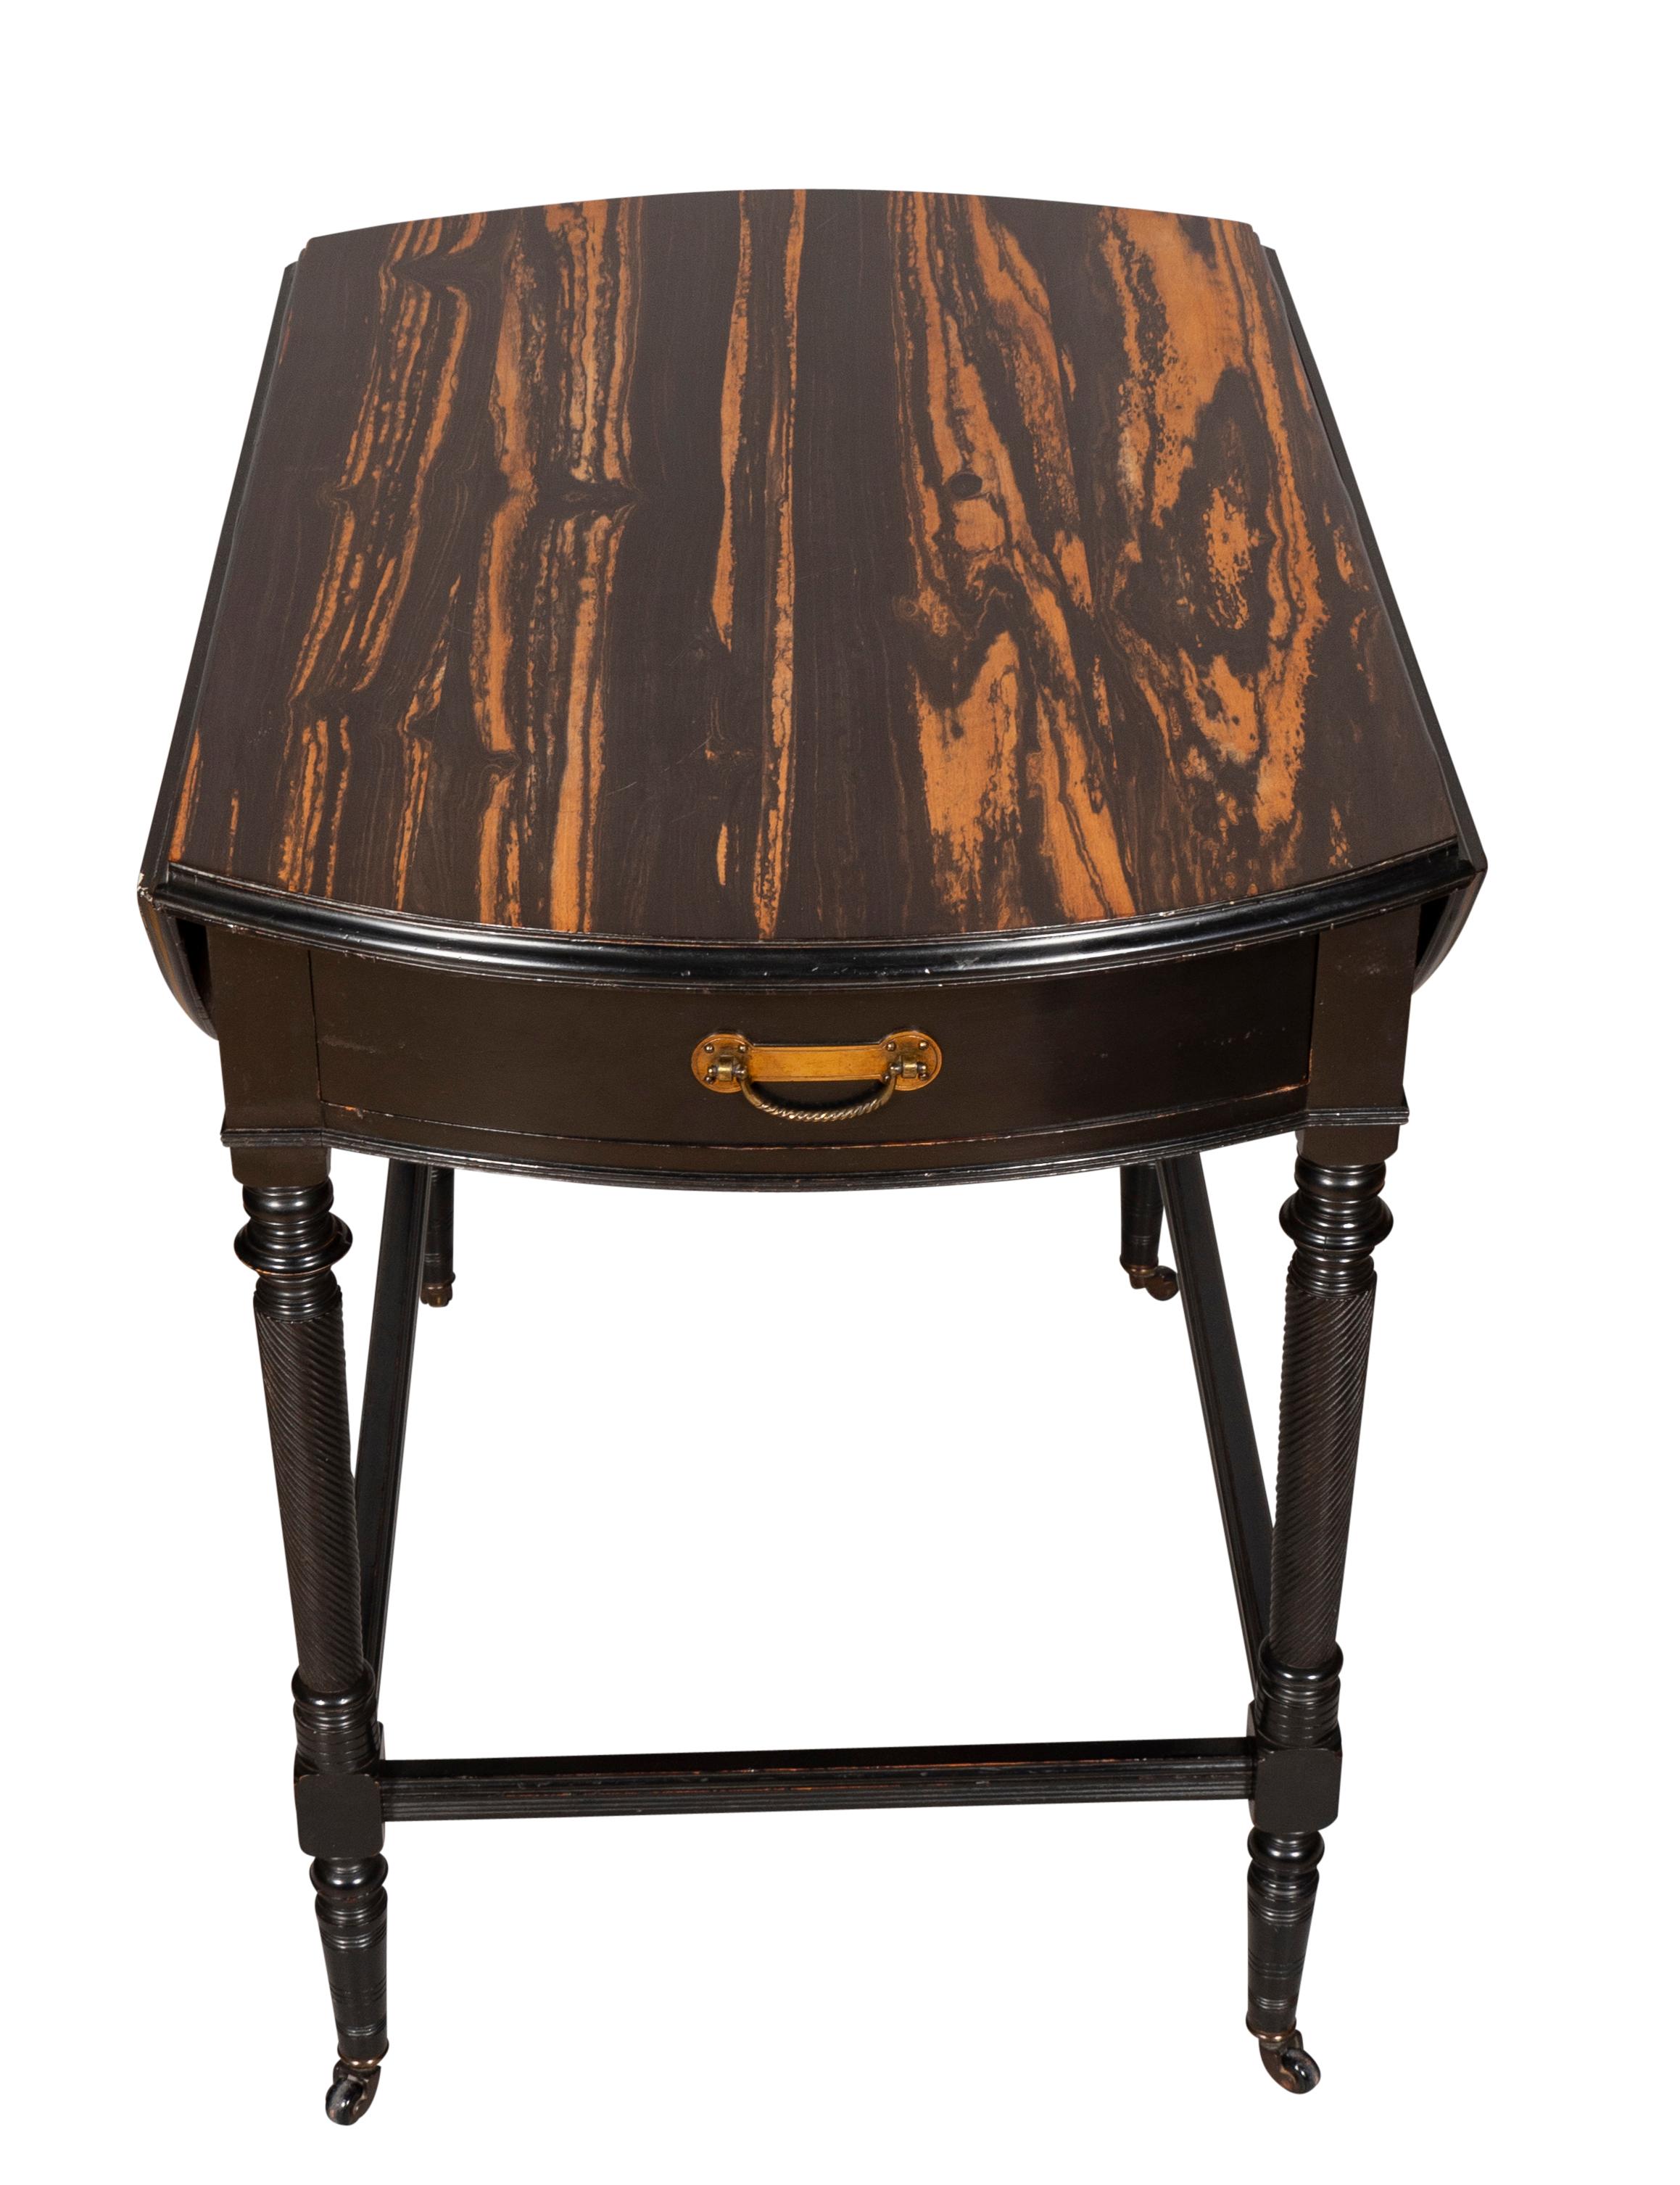 Aesthetic Movement Calamander and Ebonized Pembroke Table For Sale 4